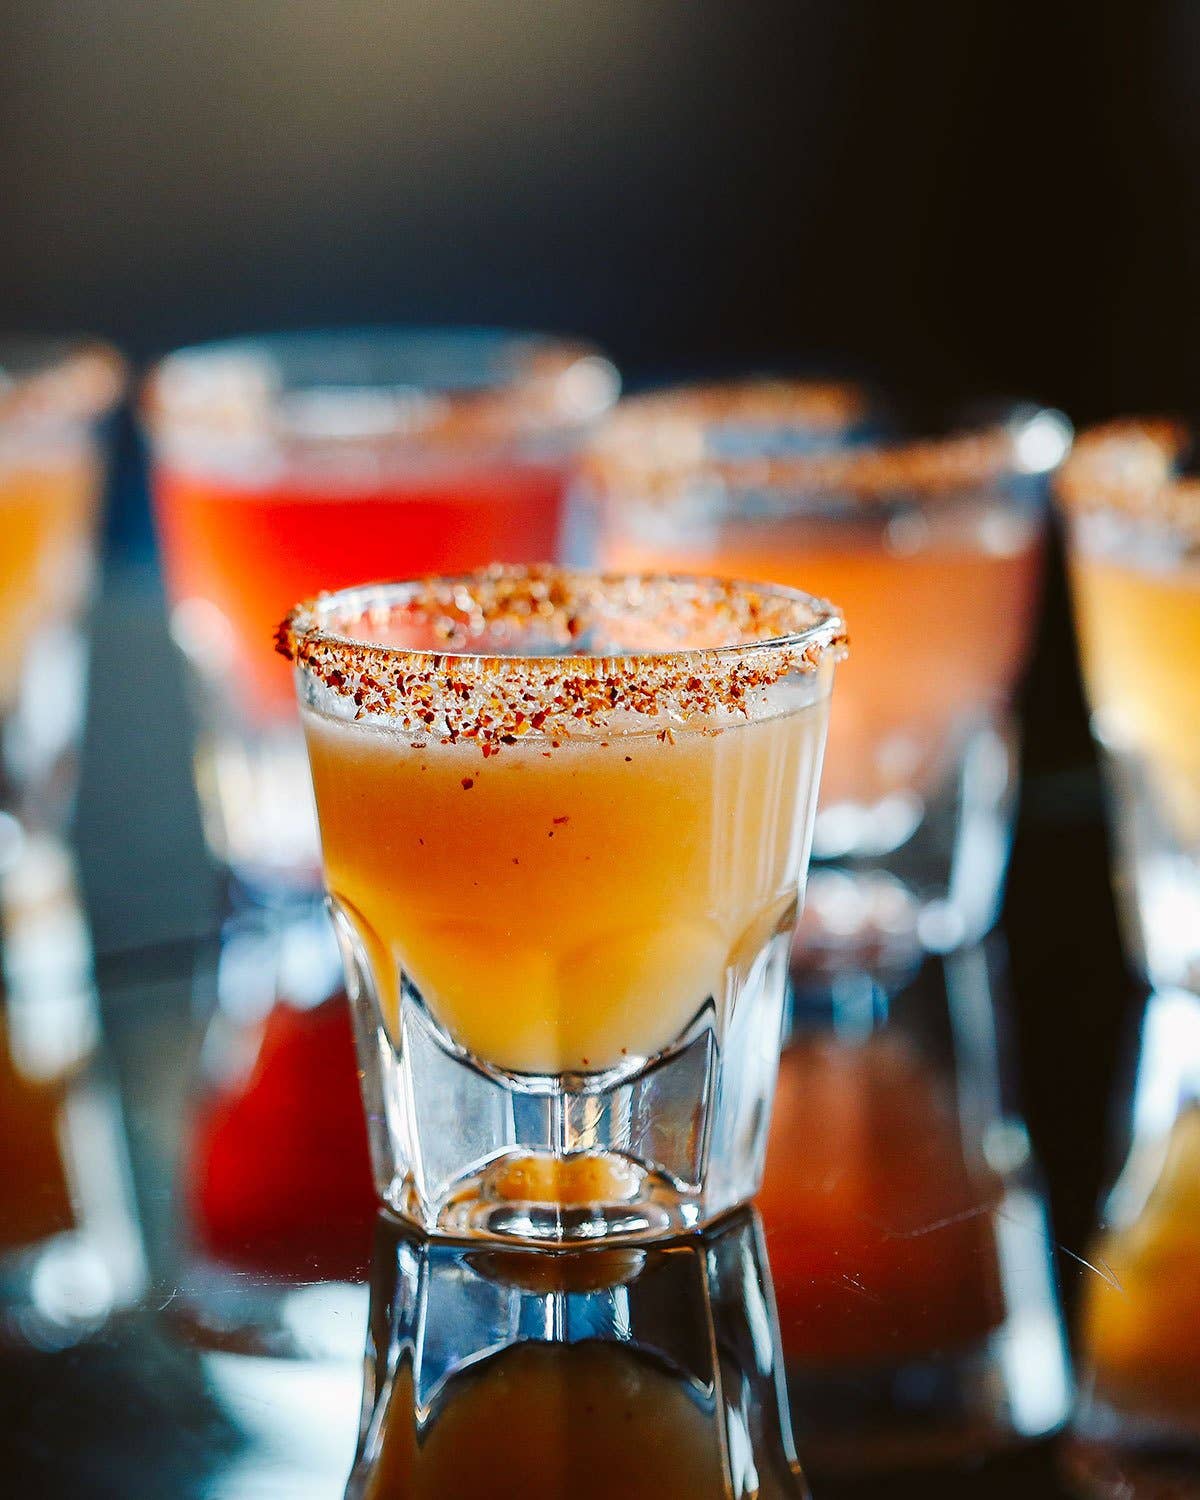 The Sweet and Spicy Tequila Shot You’ll Only Find on the Mexican Border